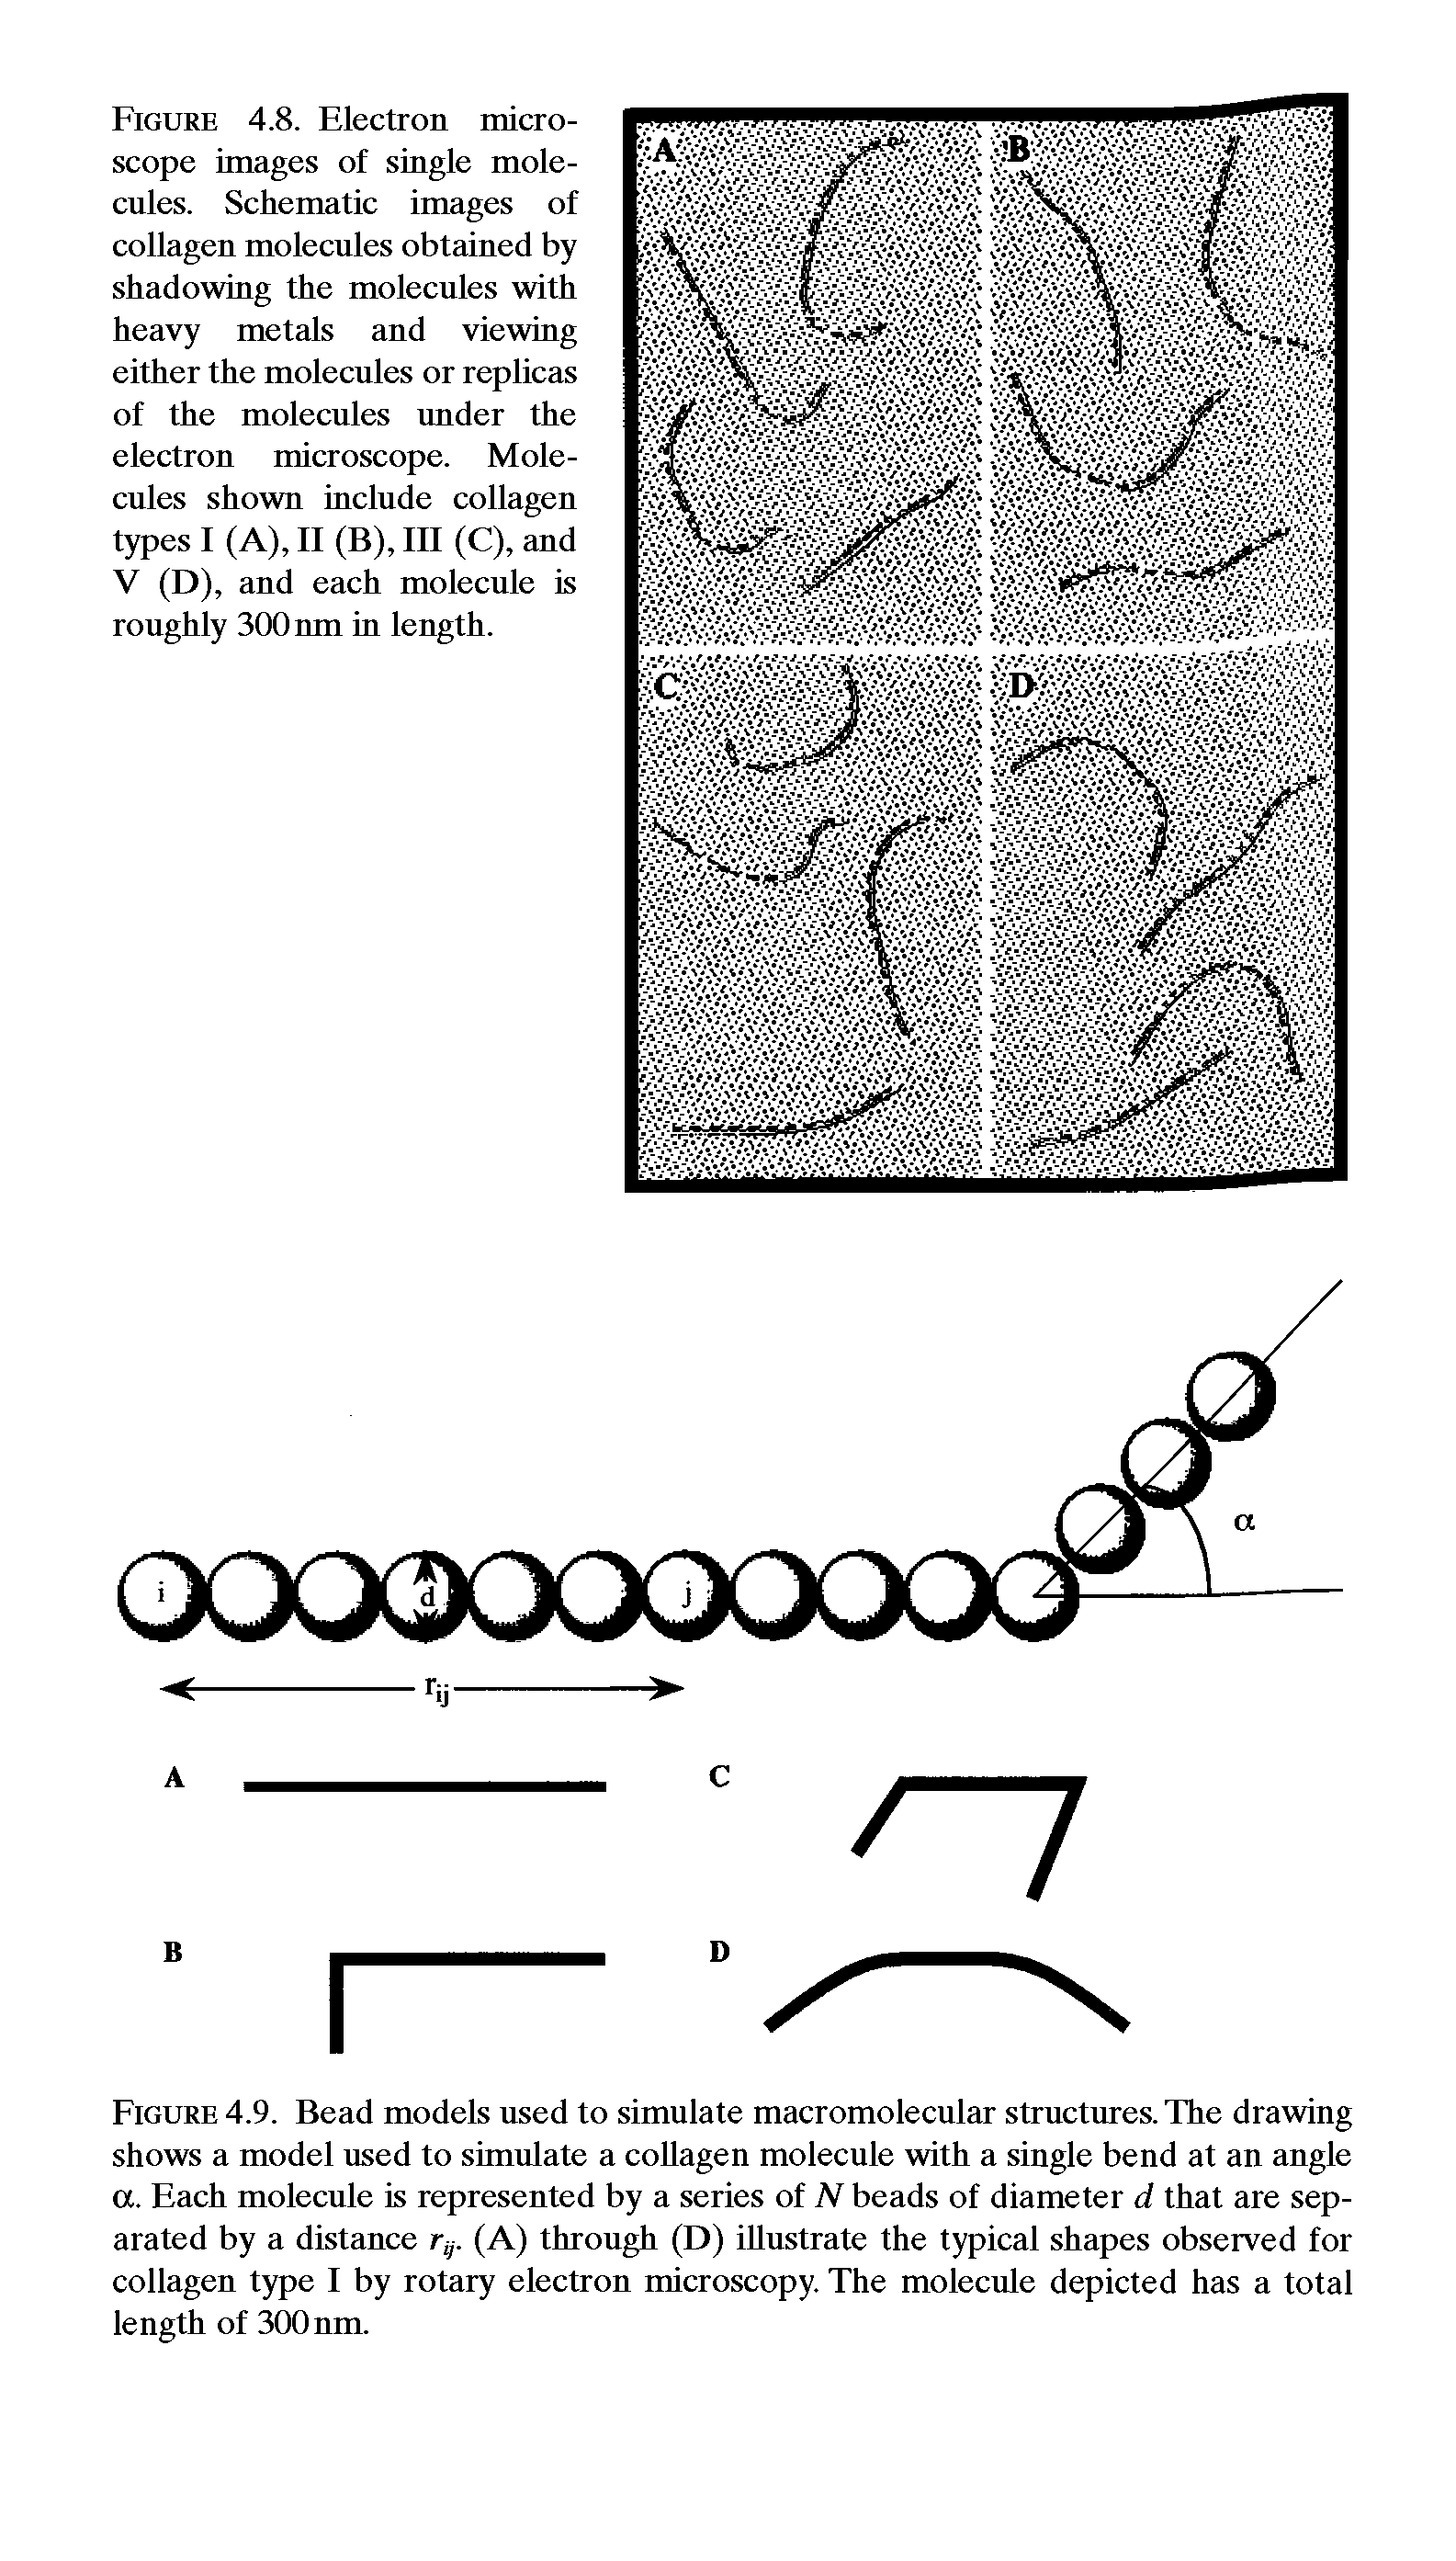 Figure 4.9. Bead models used to simulate macromolecular structures. The drawing shows a model used to simulate a collagen molecule with a single bend at an angle a. Each molecule is represented by a series of N beads of diameter d that are separated by a distance rv. (A) through (D) illustrate the typical shapes observed for collagen type I by rotary electron microscopy. The molecule depicted has a total length of 300 nm.